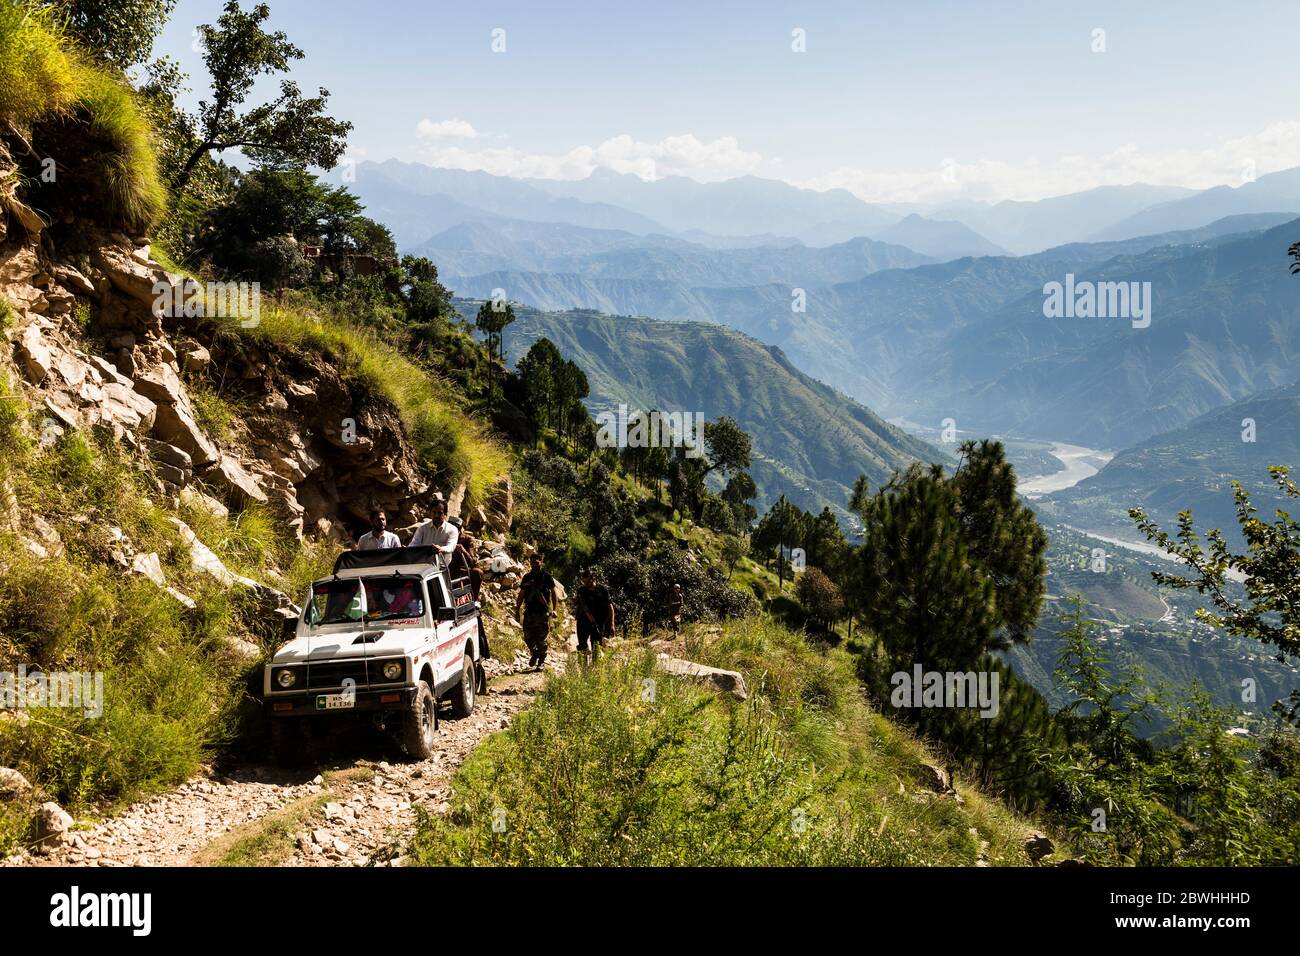 4wd, Indus valley from ancient battle field Pirsar(Aornos fortress) trekking,Bisham, Shangla, Khyber Pakhtunkhwa Province, Pakistan, South Asia, Asia Stock Photo